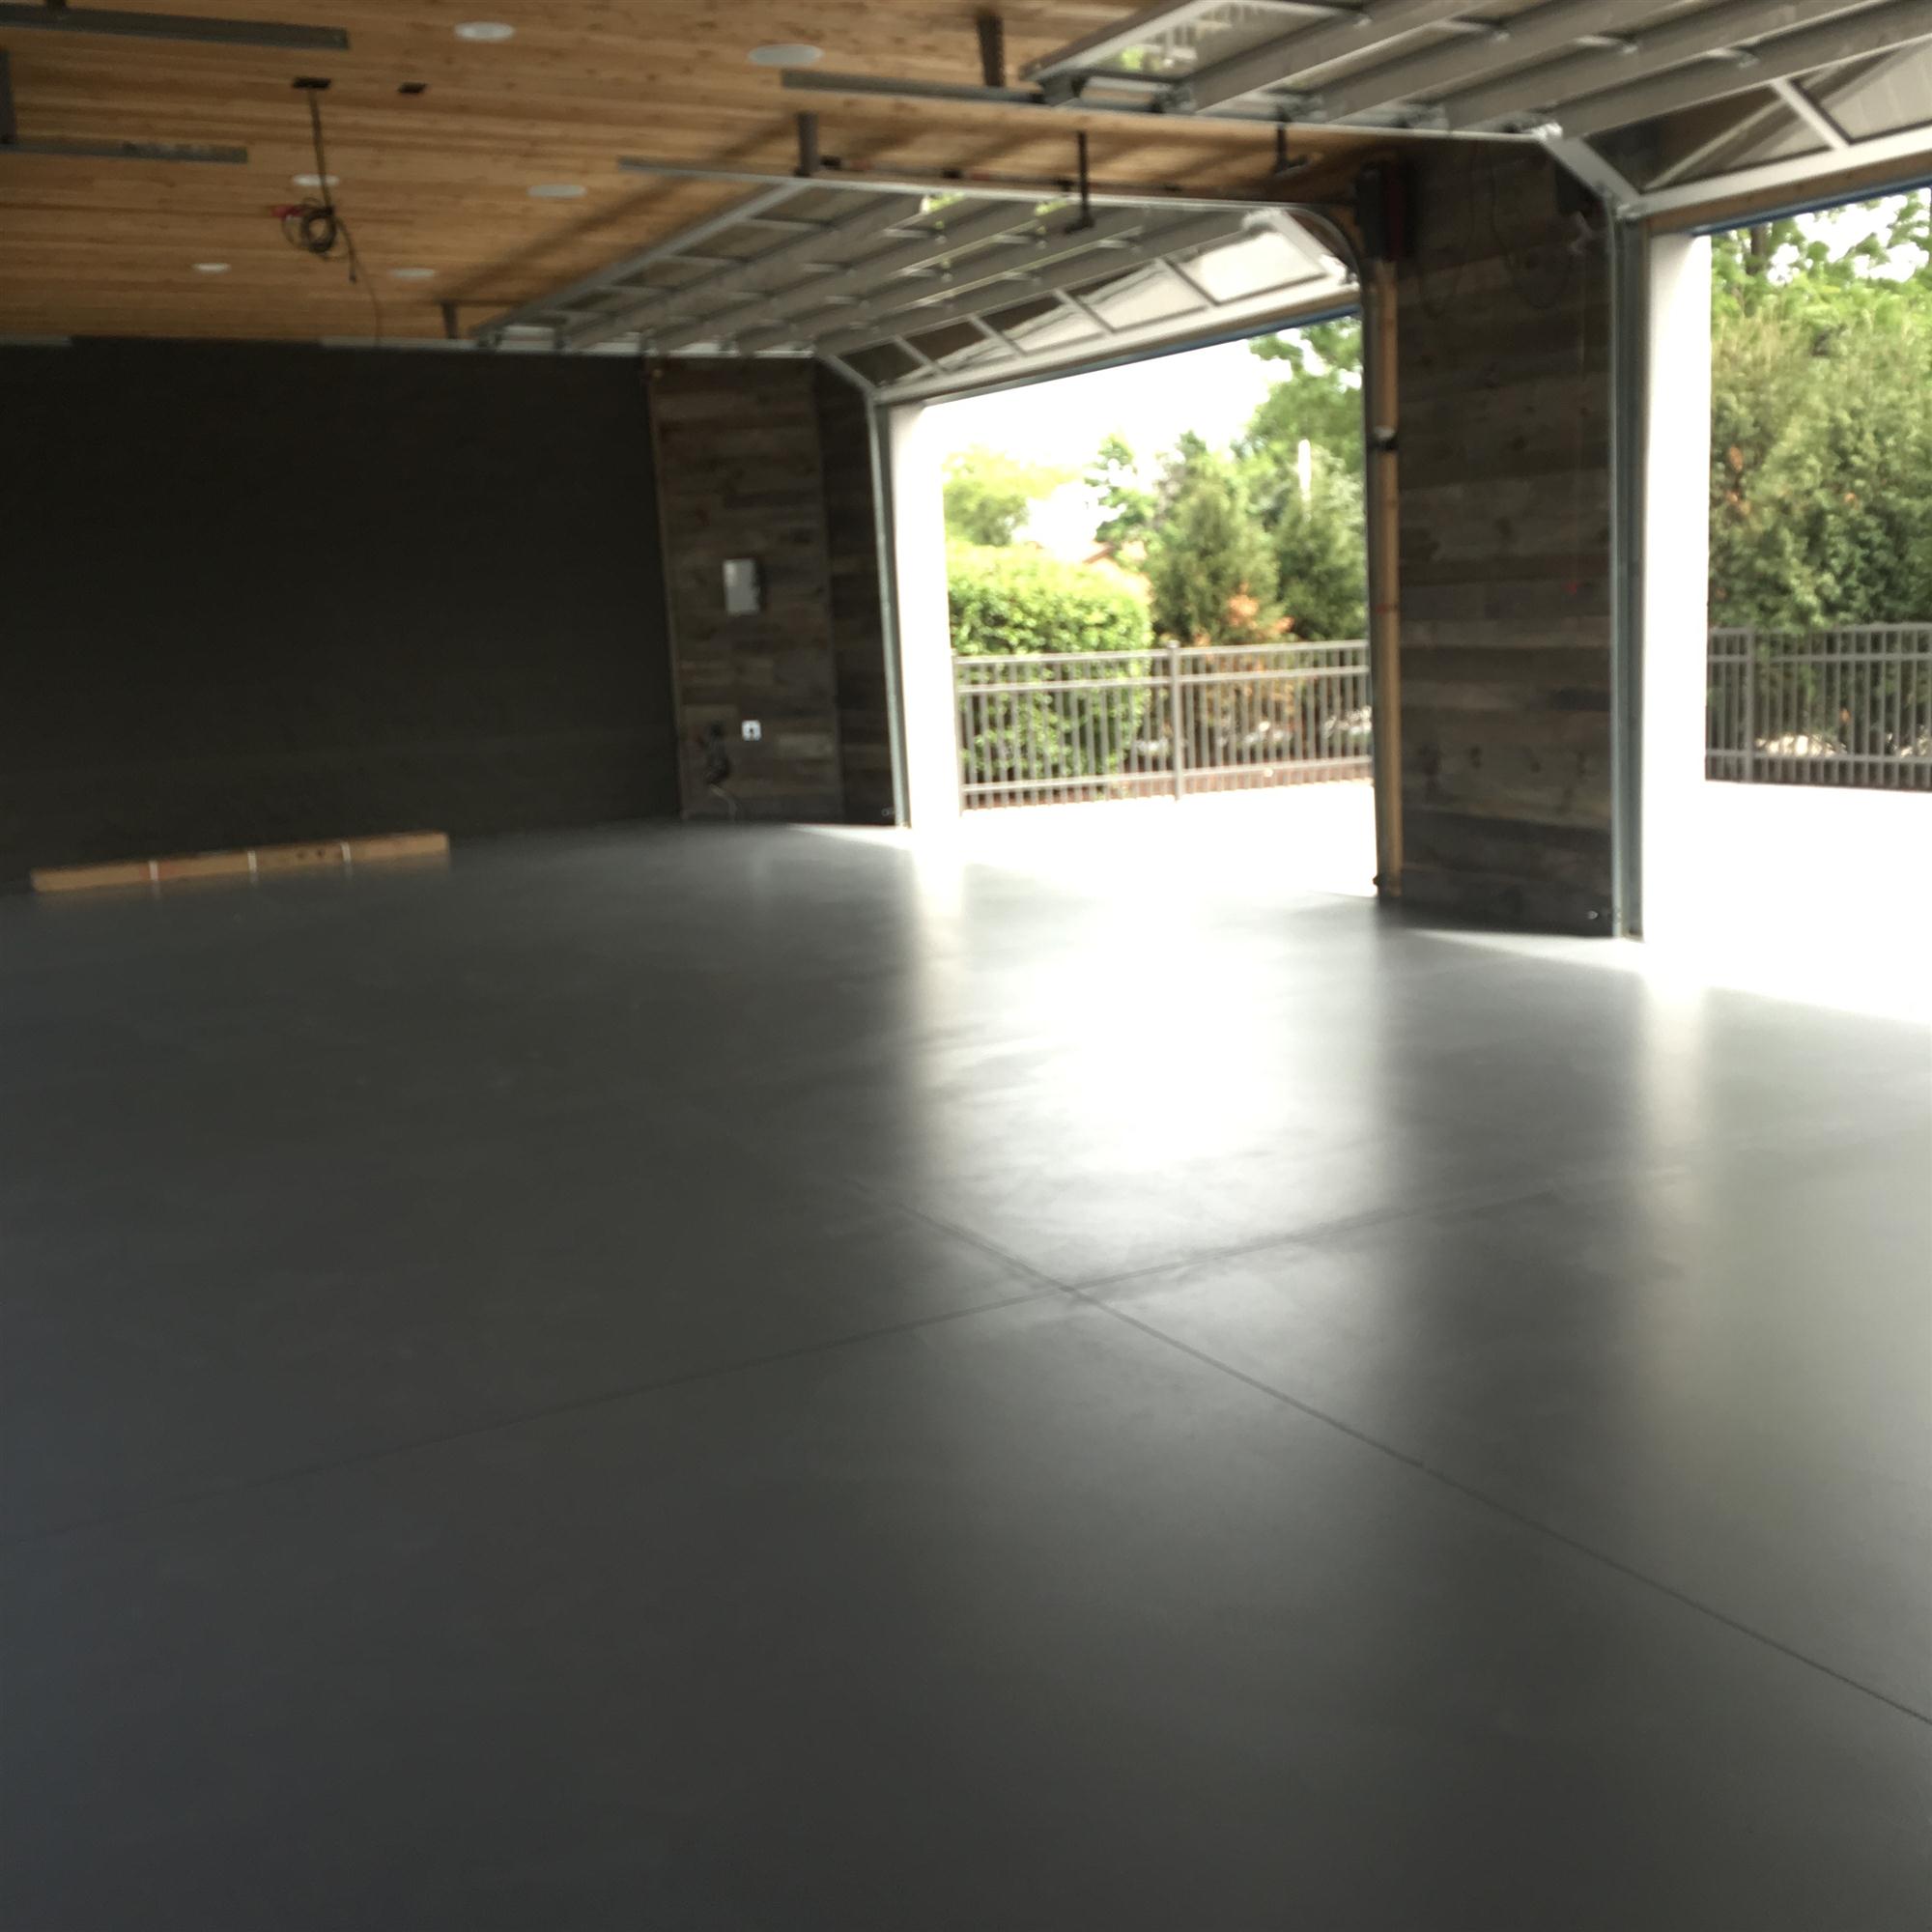 Mequon garage floor painting contractors resurfaced and painted the concrete